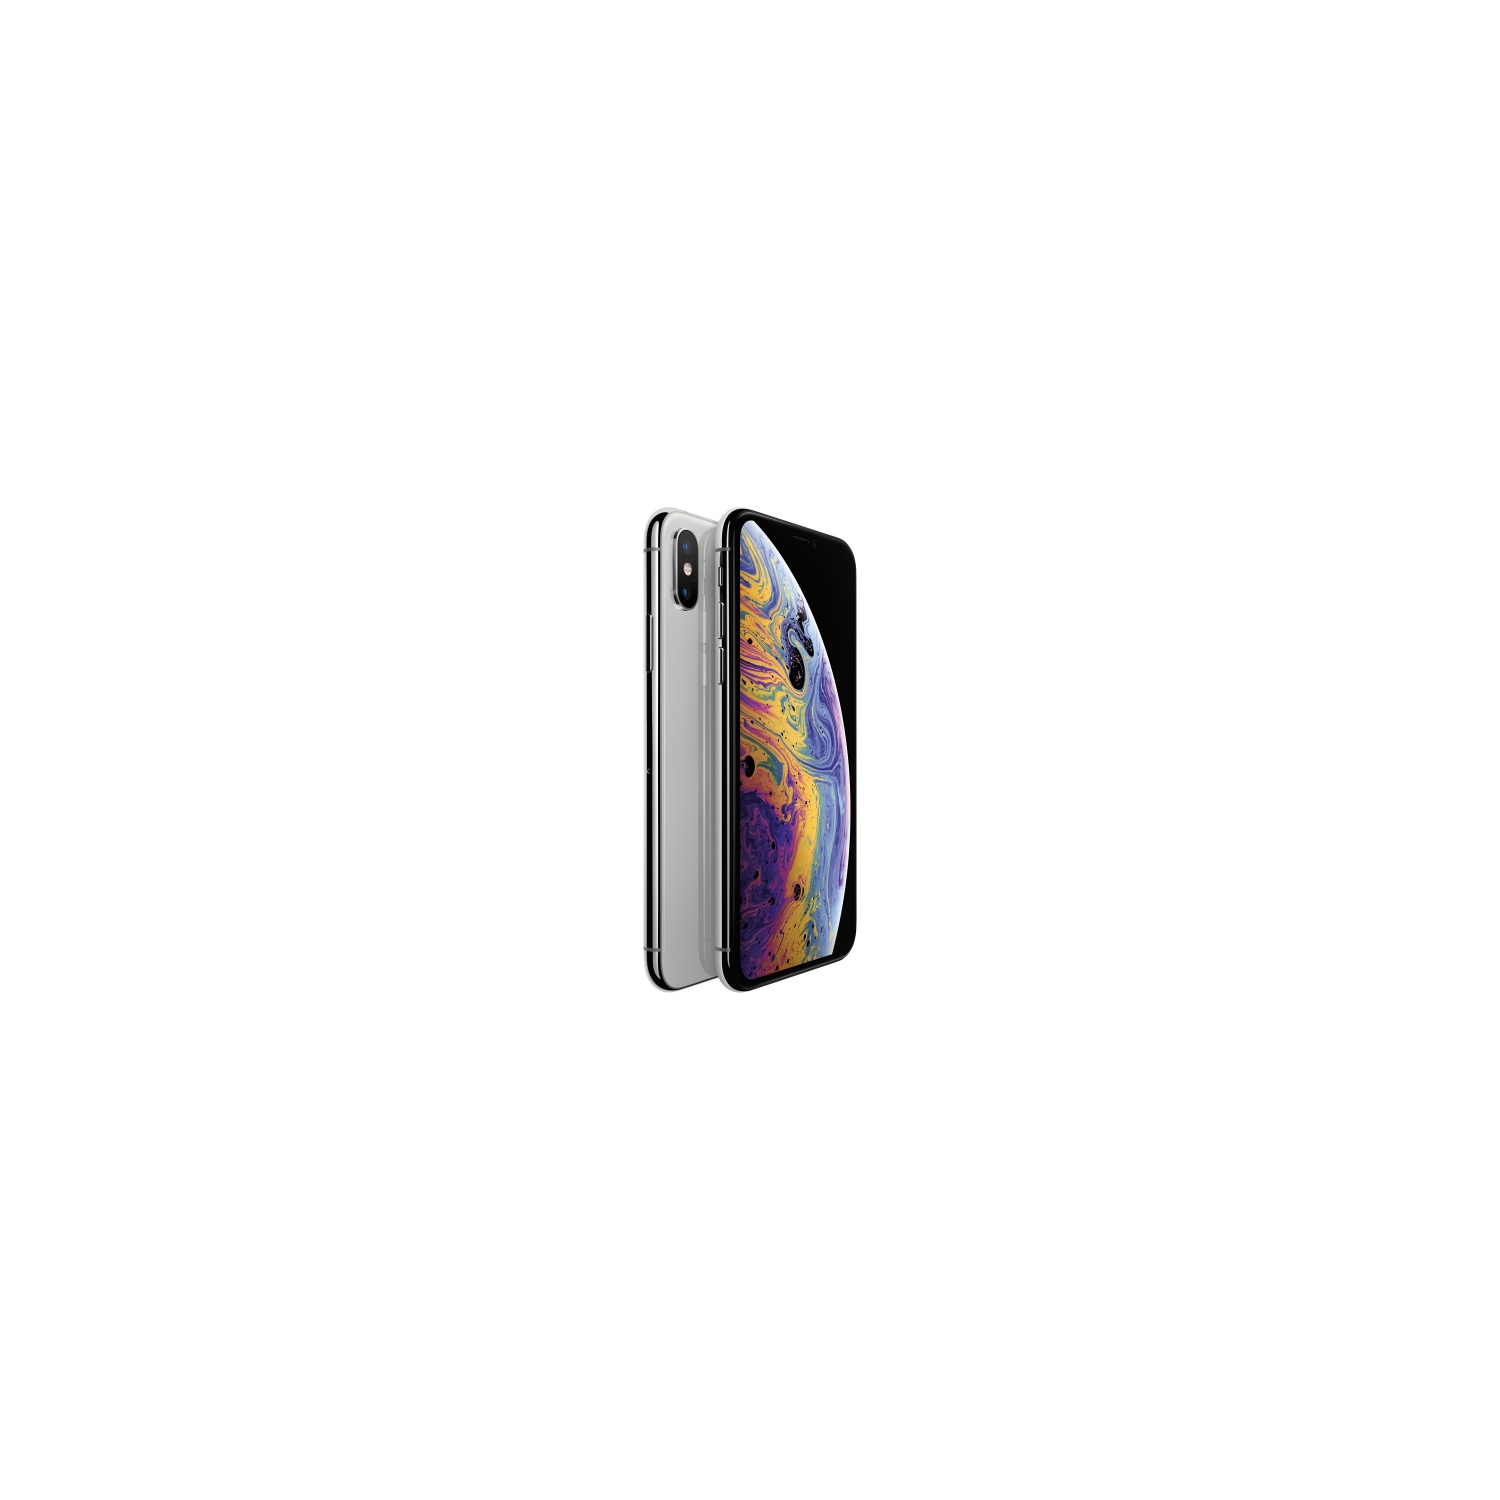 Refurbished (Excellent) - Apple iPhone XS Max | 64GB - Smartphone - Silver - Unlocked - Certified Refurbished